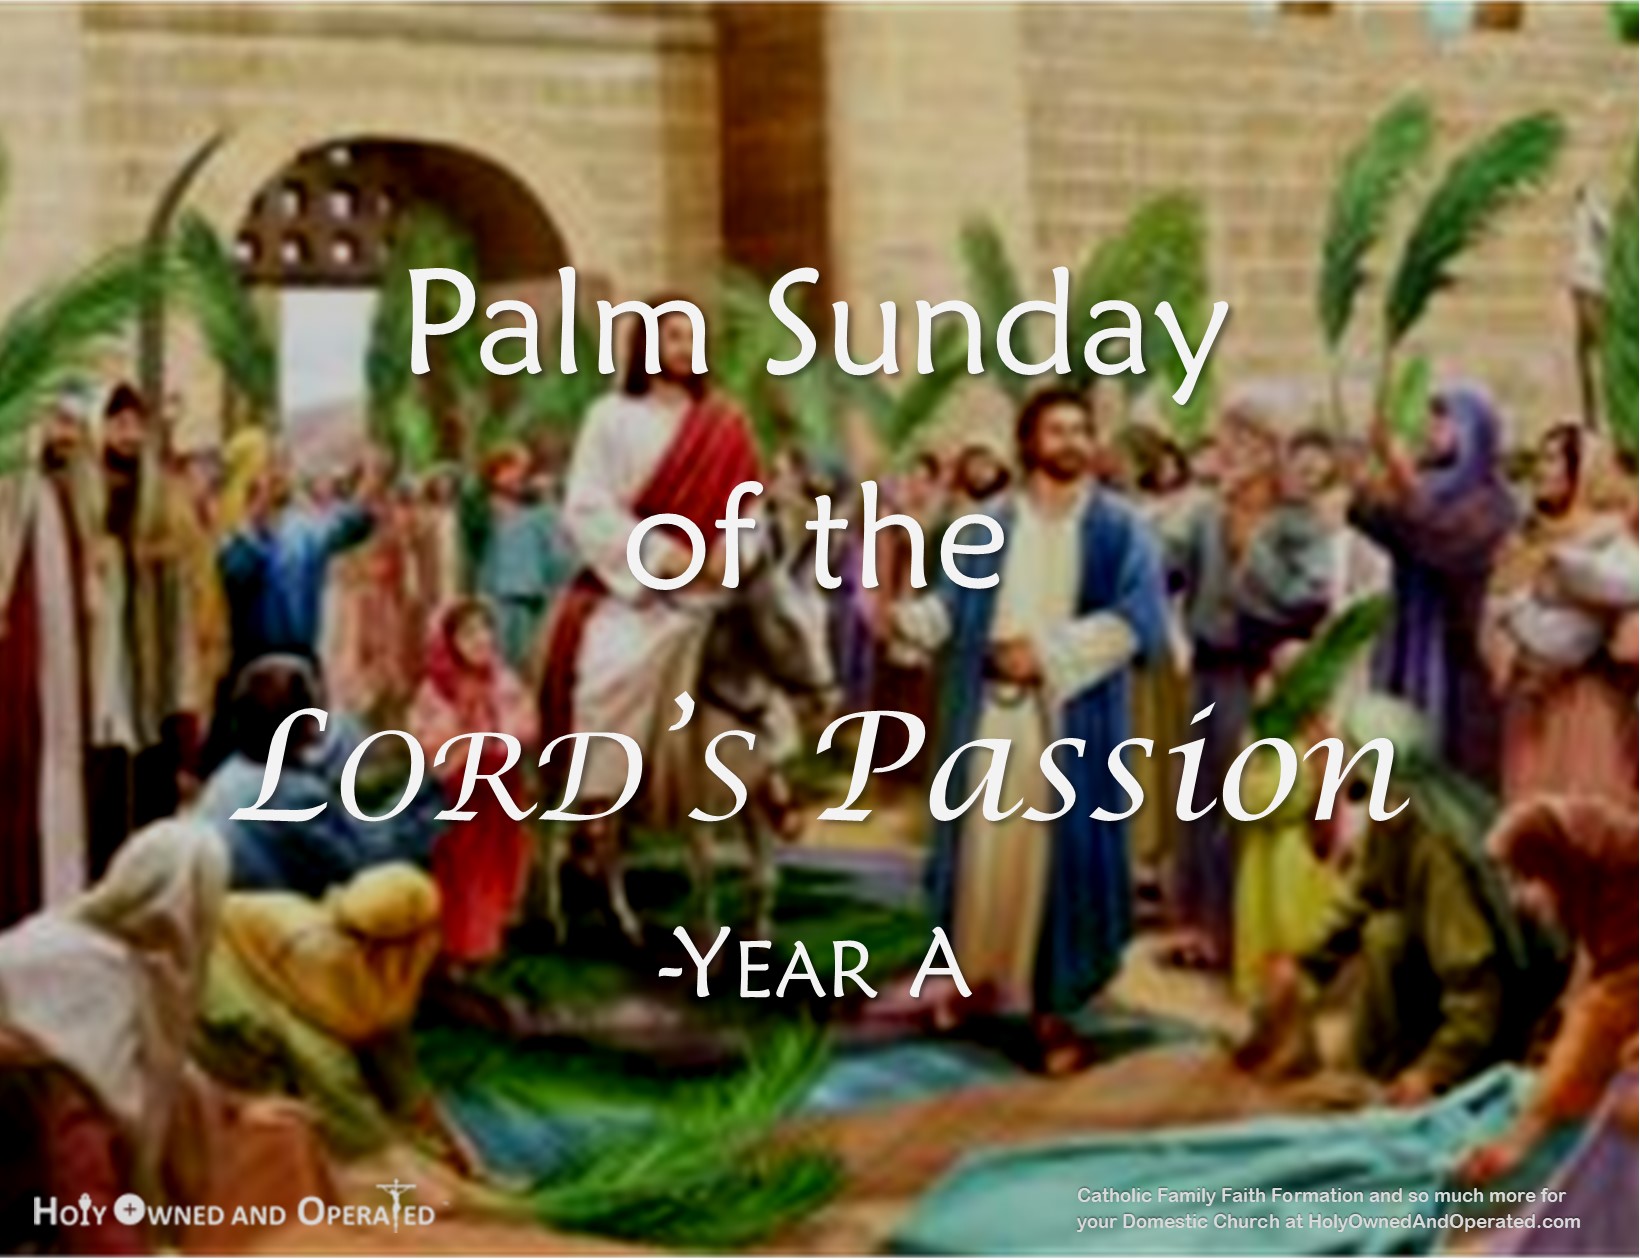 "Palm Sunday of the Lord's Passion - Year A" Picture of Jesus entering Jerusalem on a donkey with people placing palm branches.